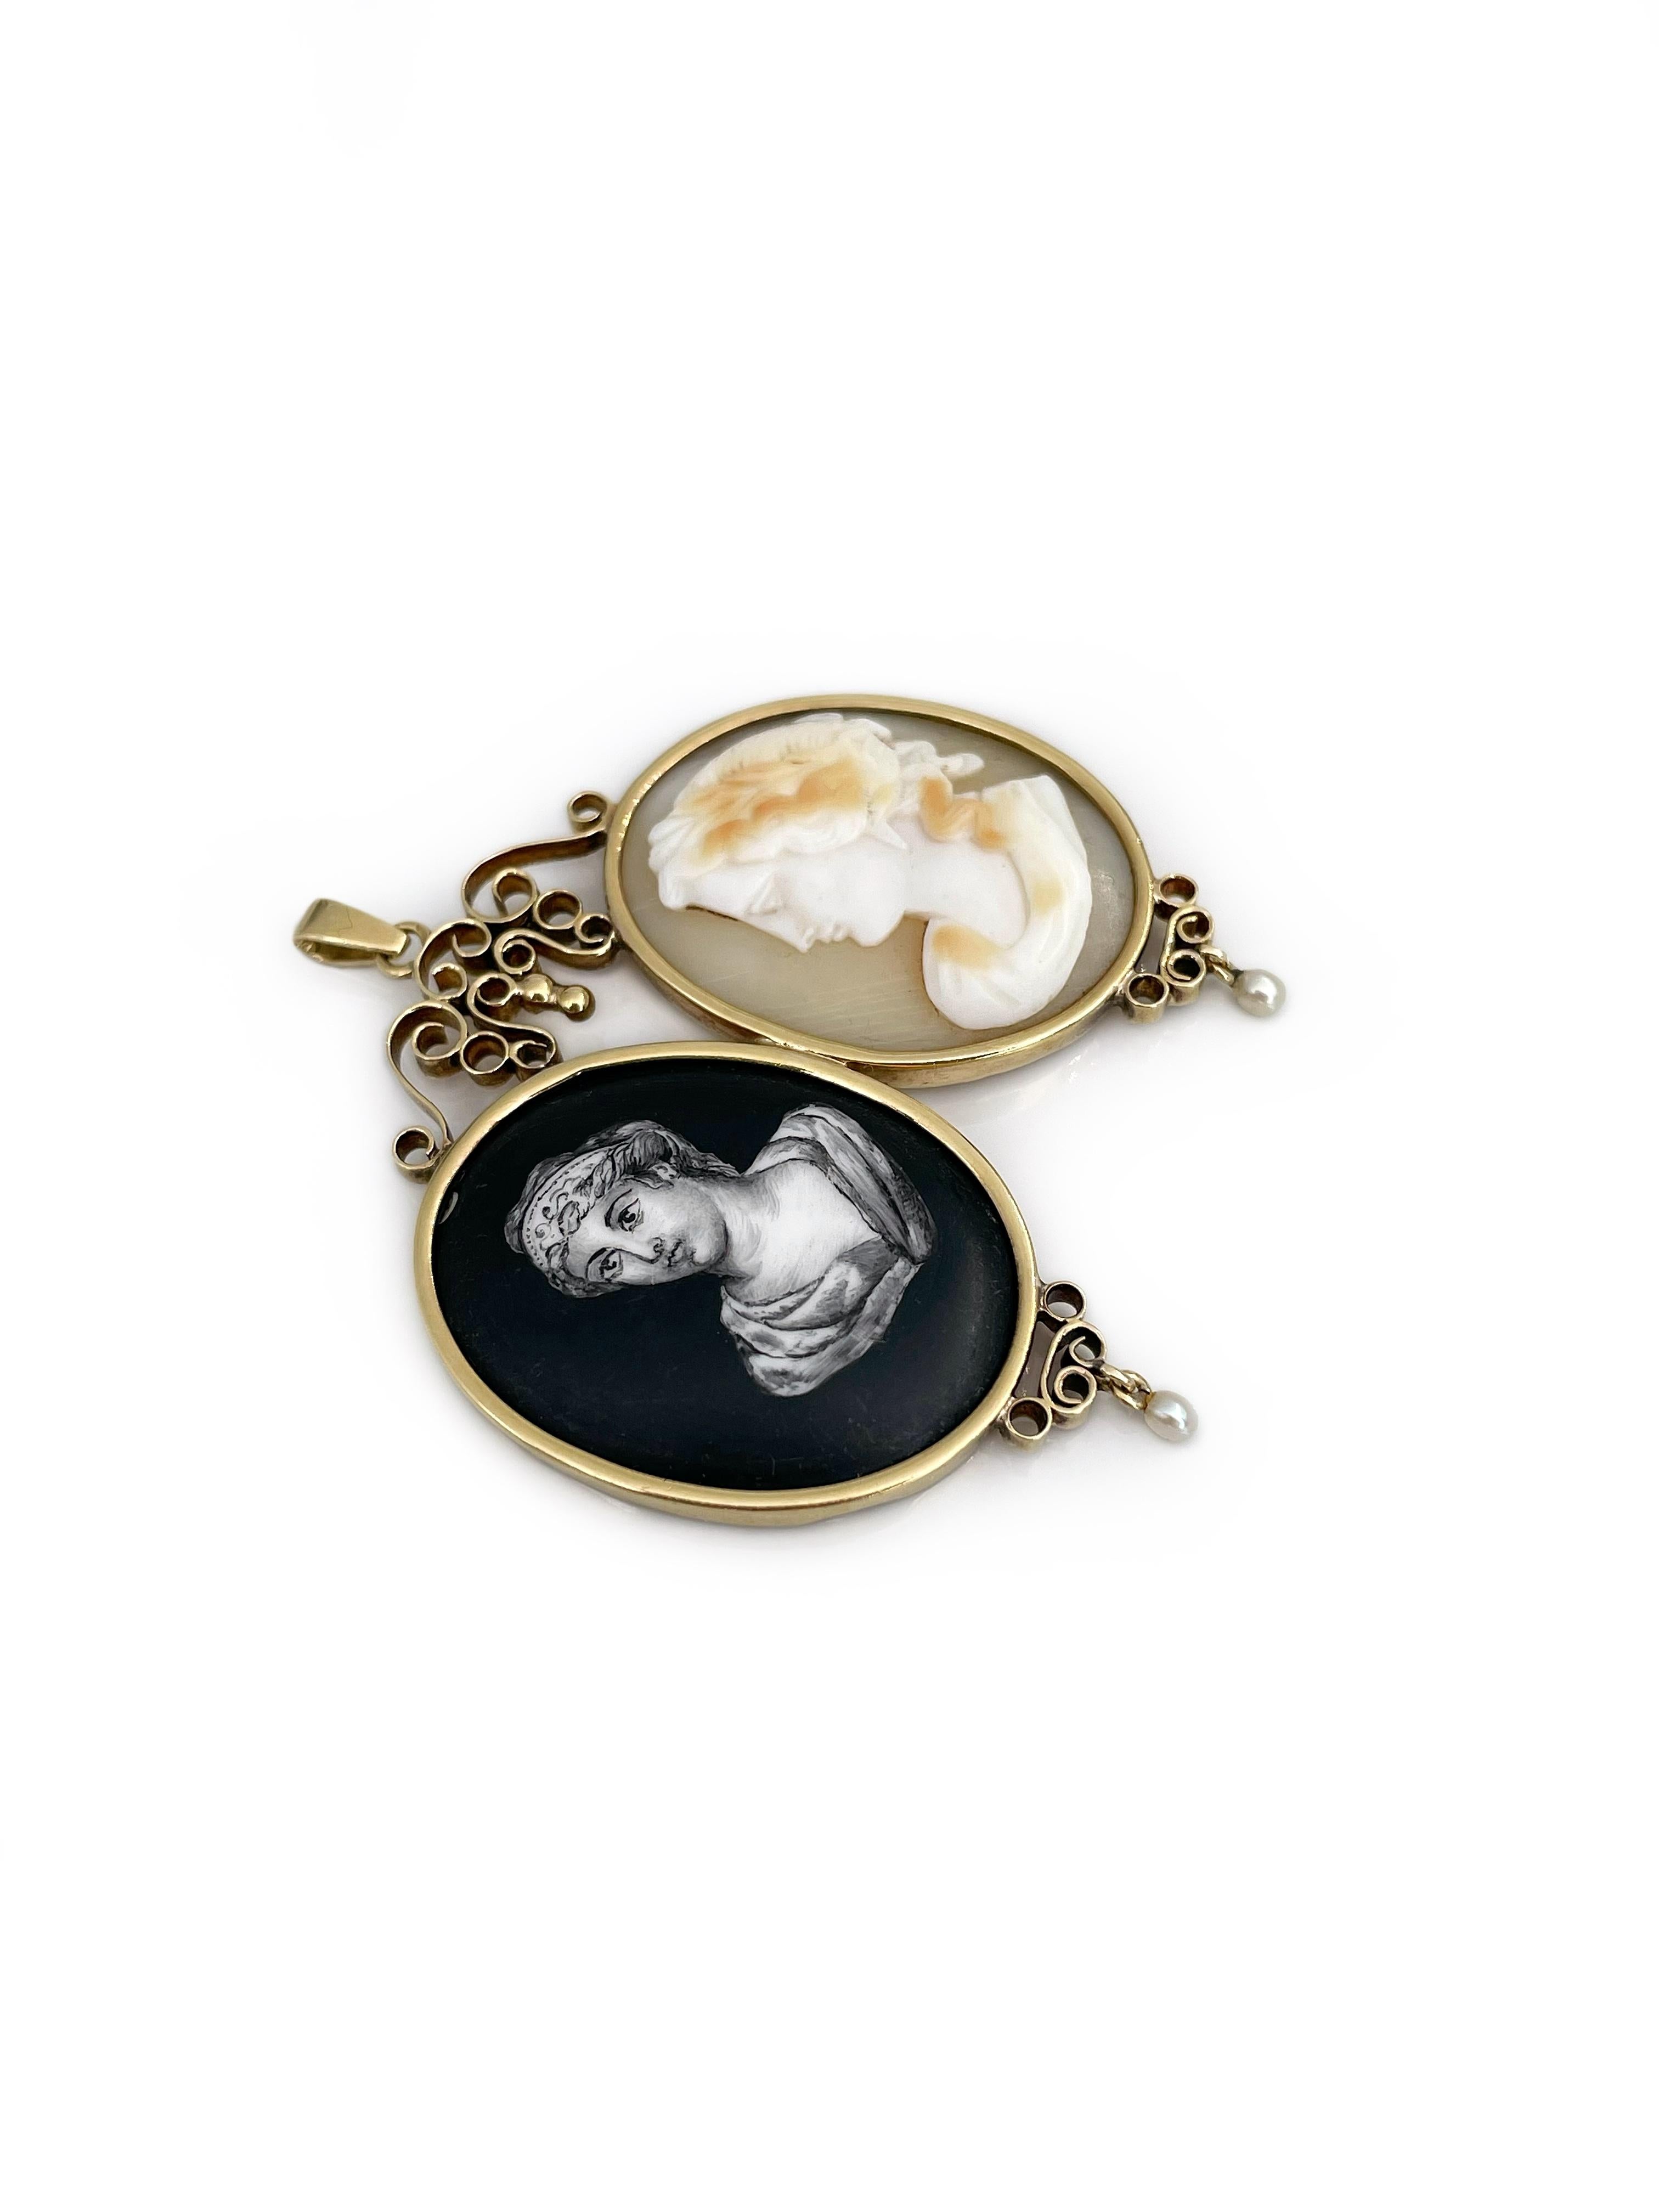 This is an exceptional antique double portrait pendant necklace crafted in 18K gold. It features two portraits of ladies. One is made of carved shell using cameo technique. Another is painted in black enamel applied on porcelain. Both portraits are